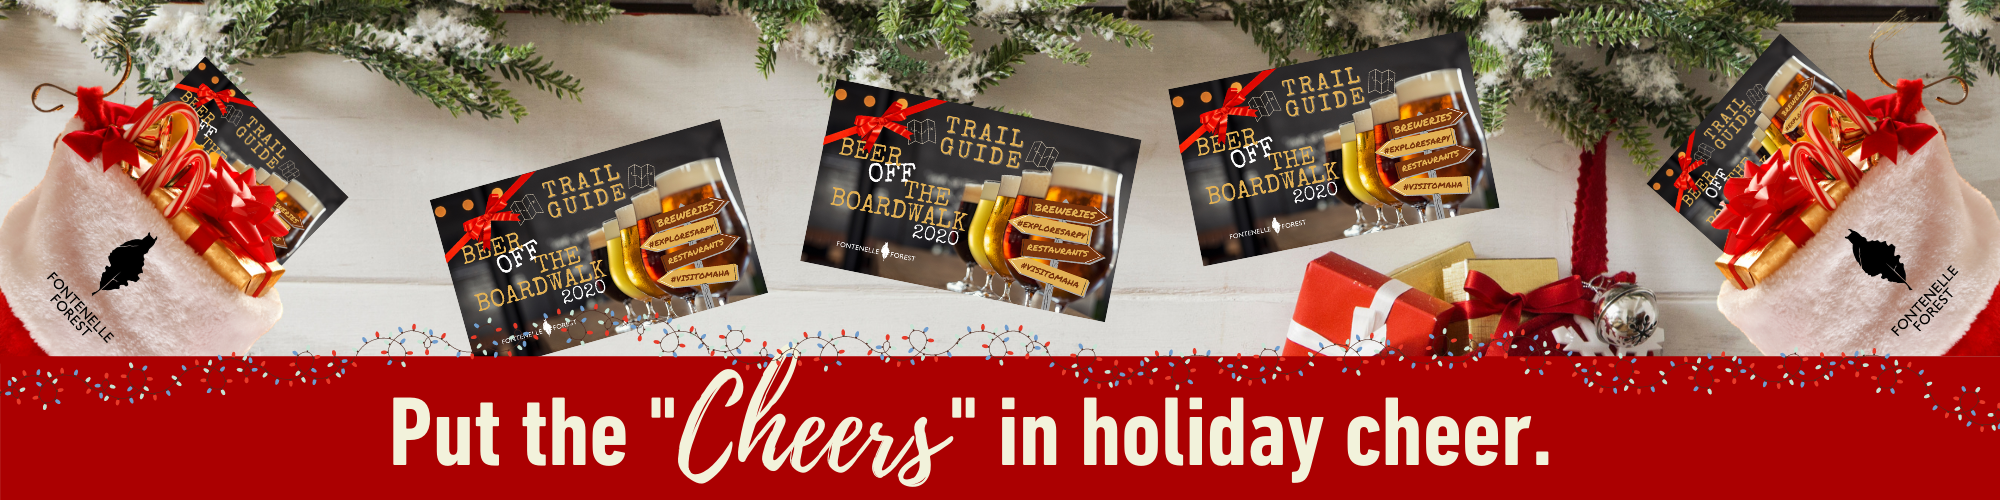 a picture of several gift cards on a white tree skirt. It has a red banner with the white text, "Put the "Cheers" in holiday cheer."